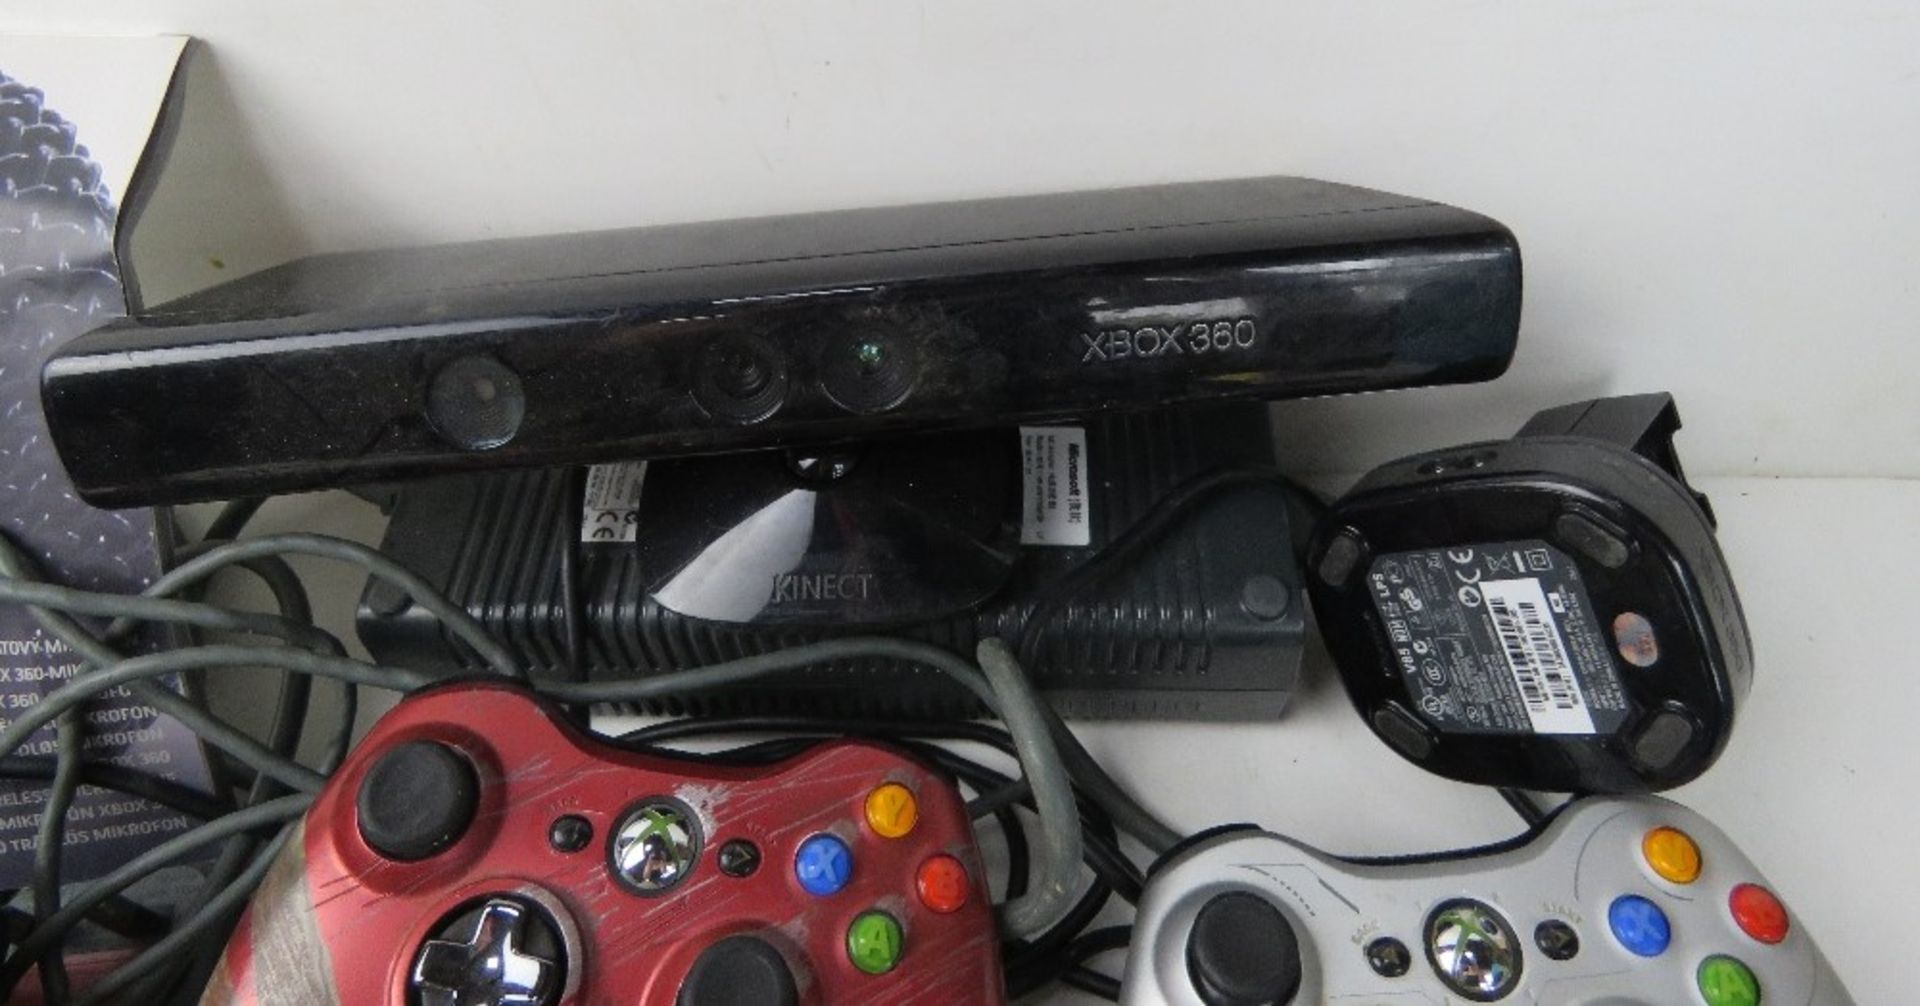 A quantity of XBox controllers, together with an instruction manual, charger and XBox 360 Kinect. - Image 4 of 4